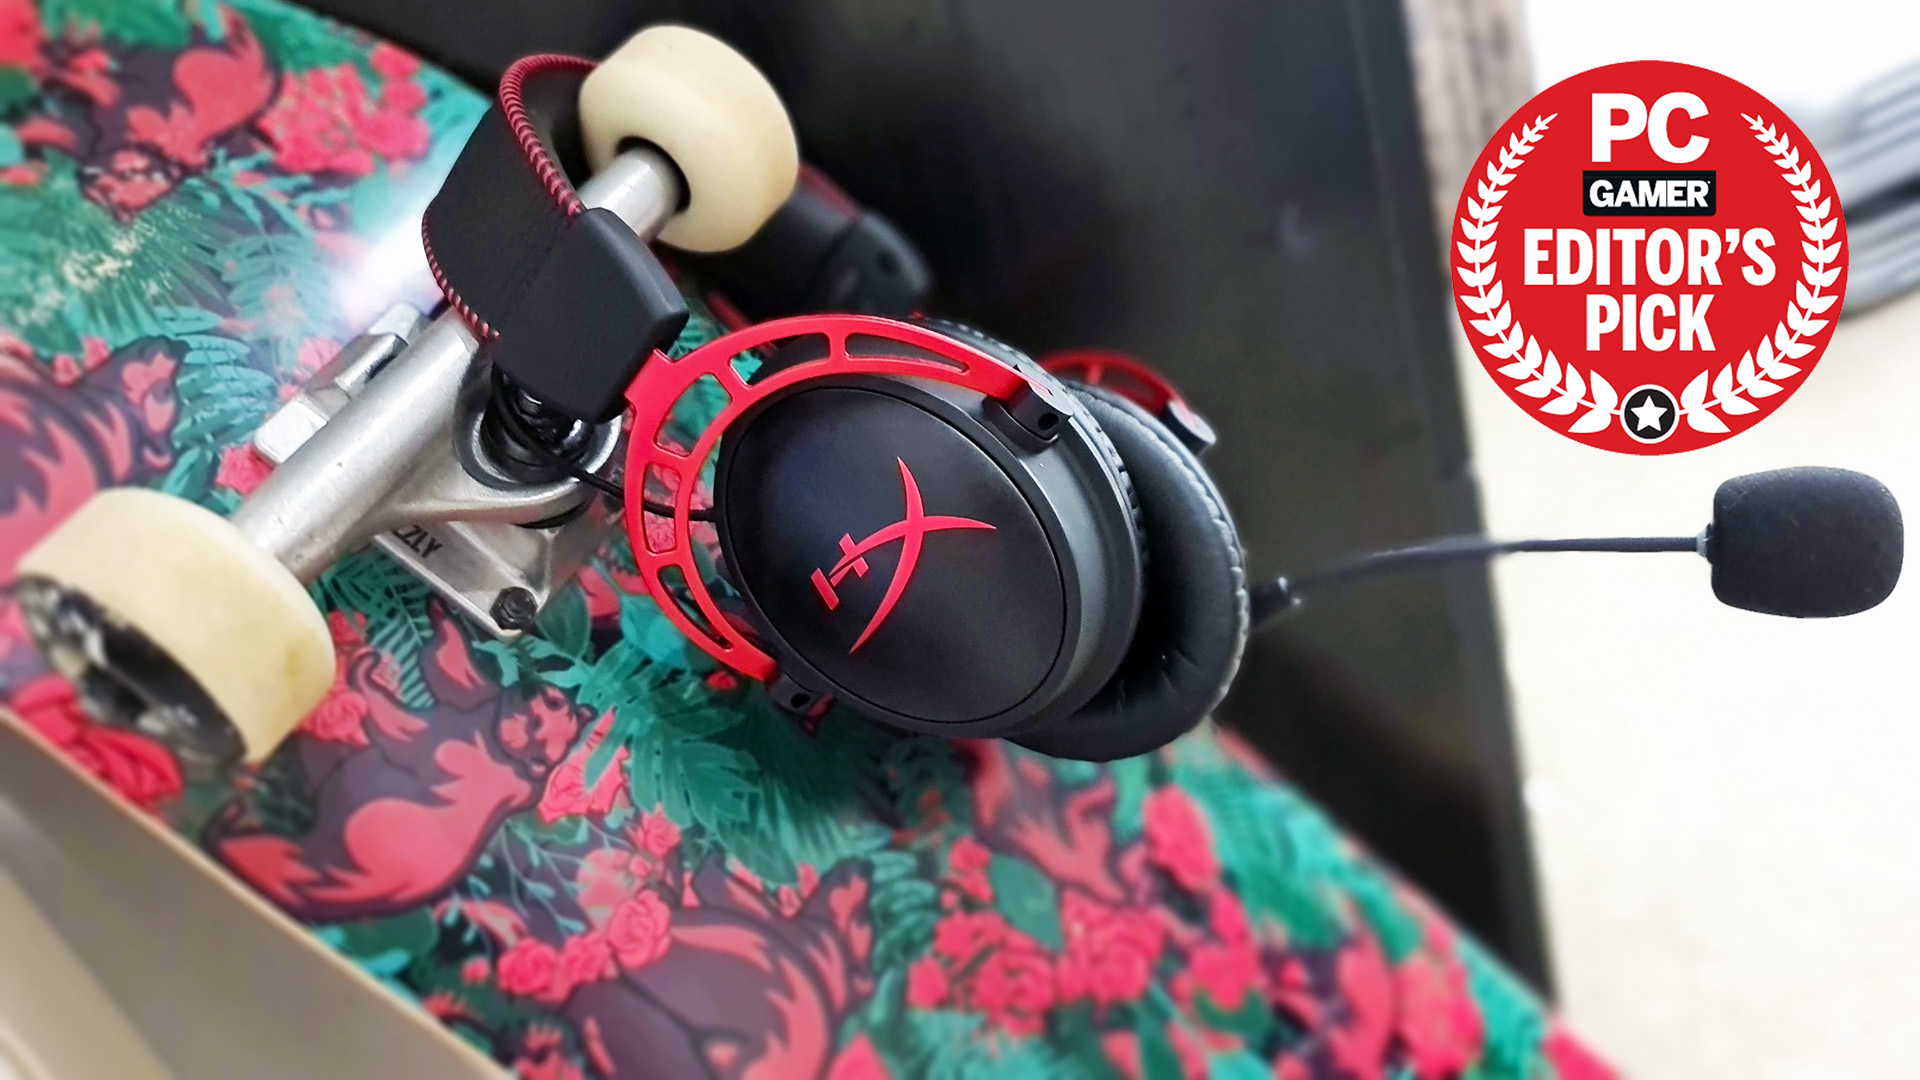 The HyperX Cloud Alpha Wireless headset in testing with PC Gamer Editor's Pick badge